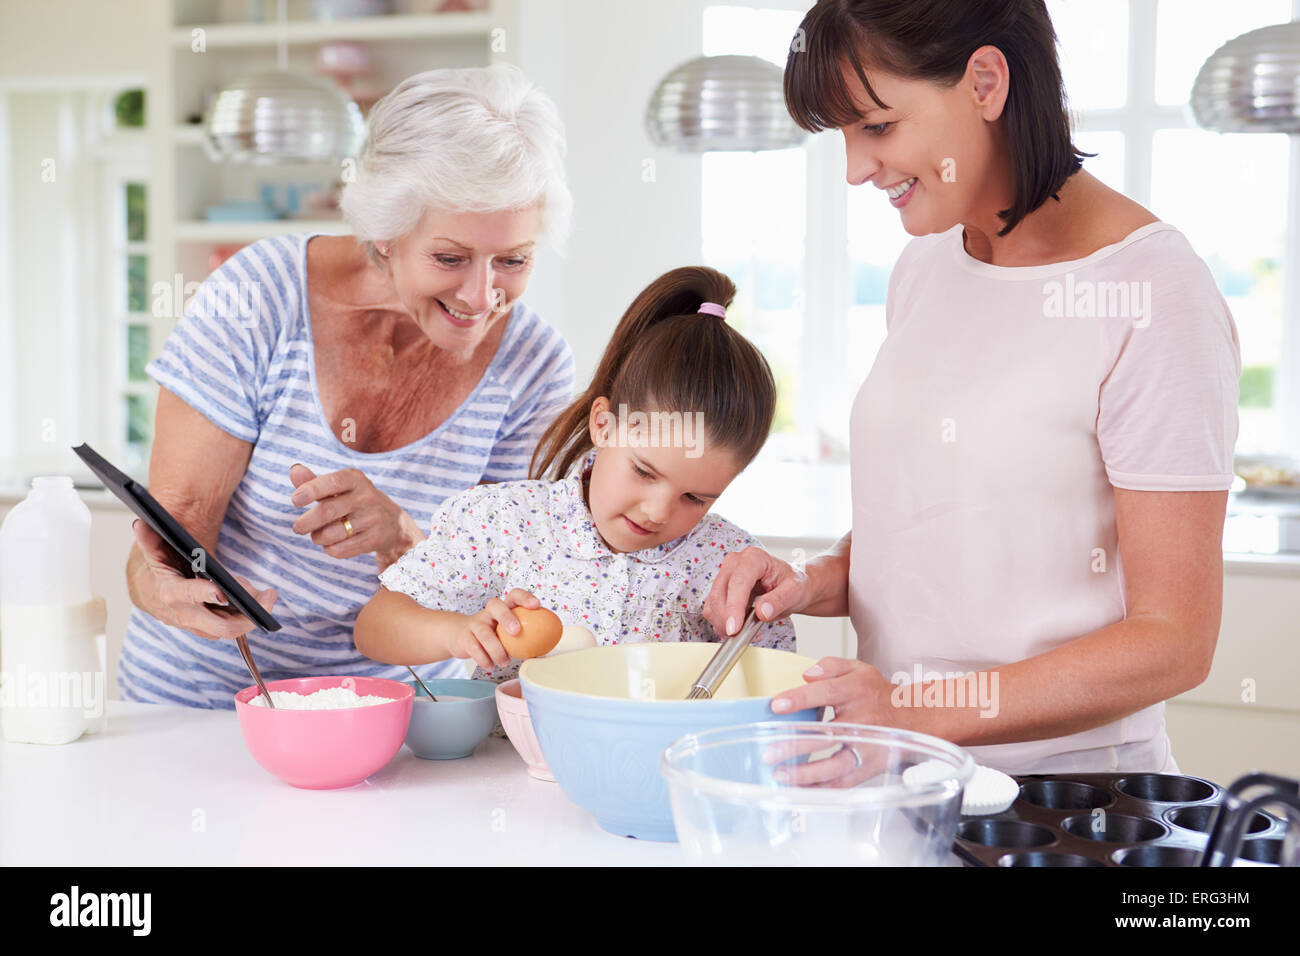 Grandmother, Granddaughter And Mother Baking Cake In Kitchen Stock Photo